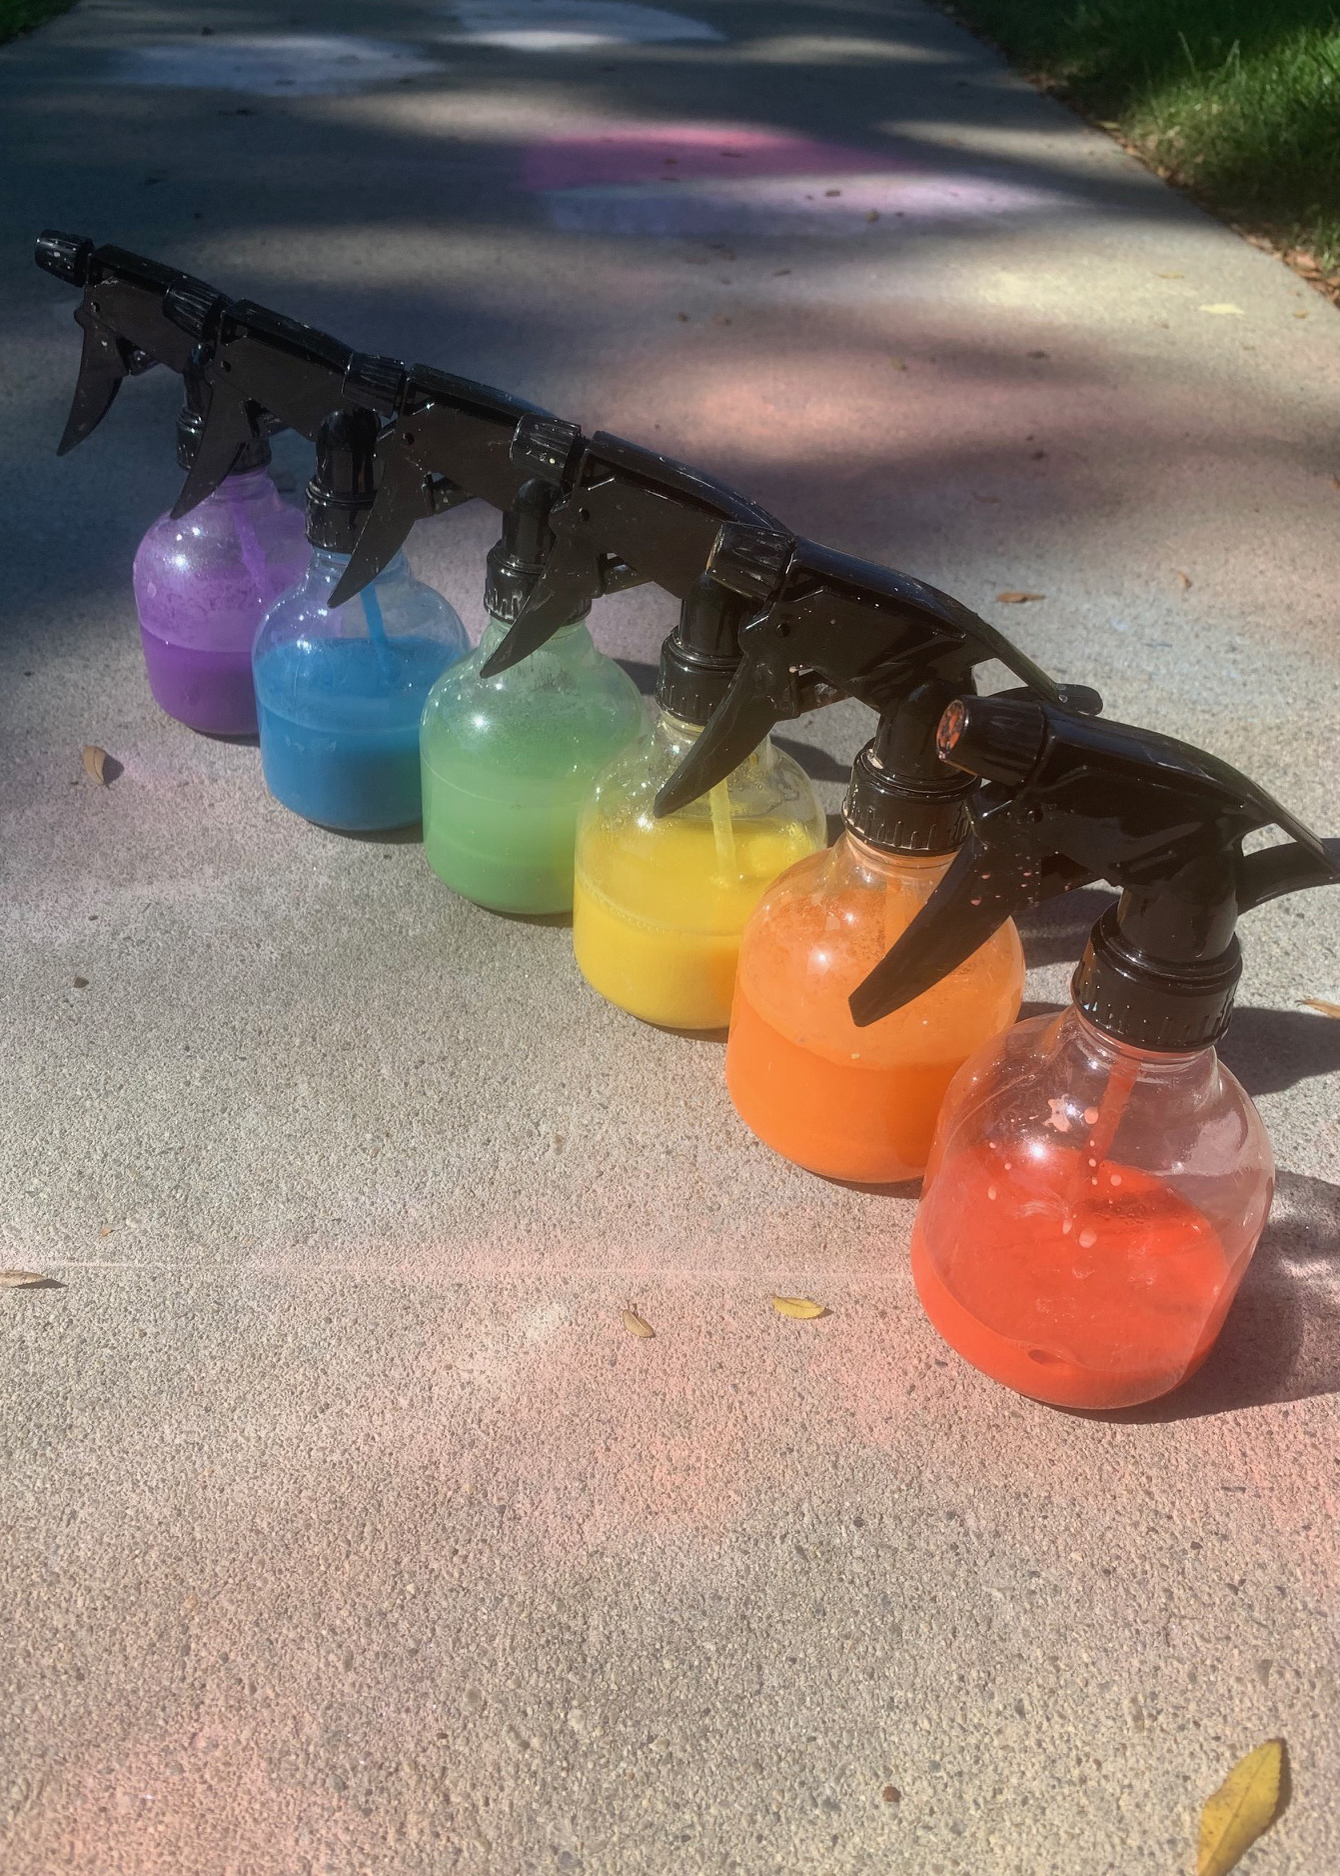 Learn how to make your own chalk spray, the easy way!